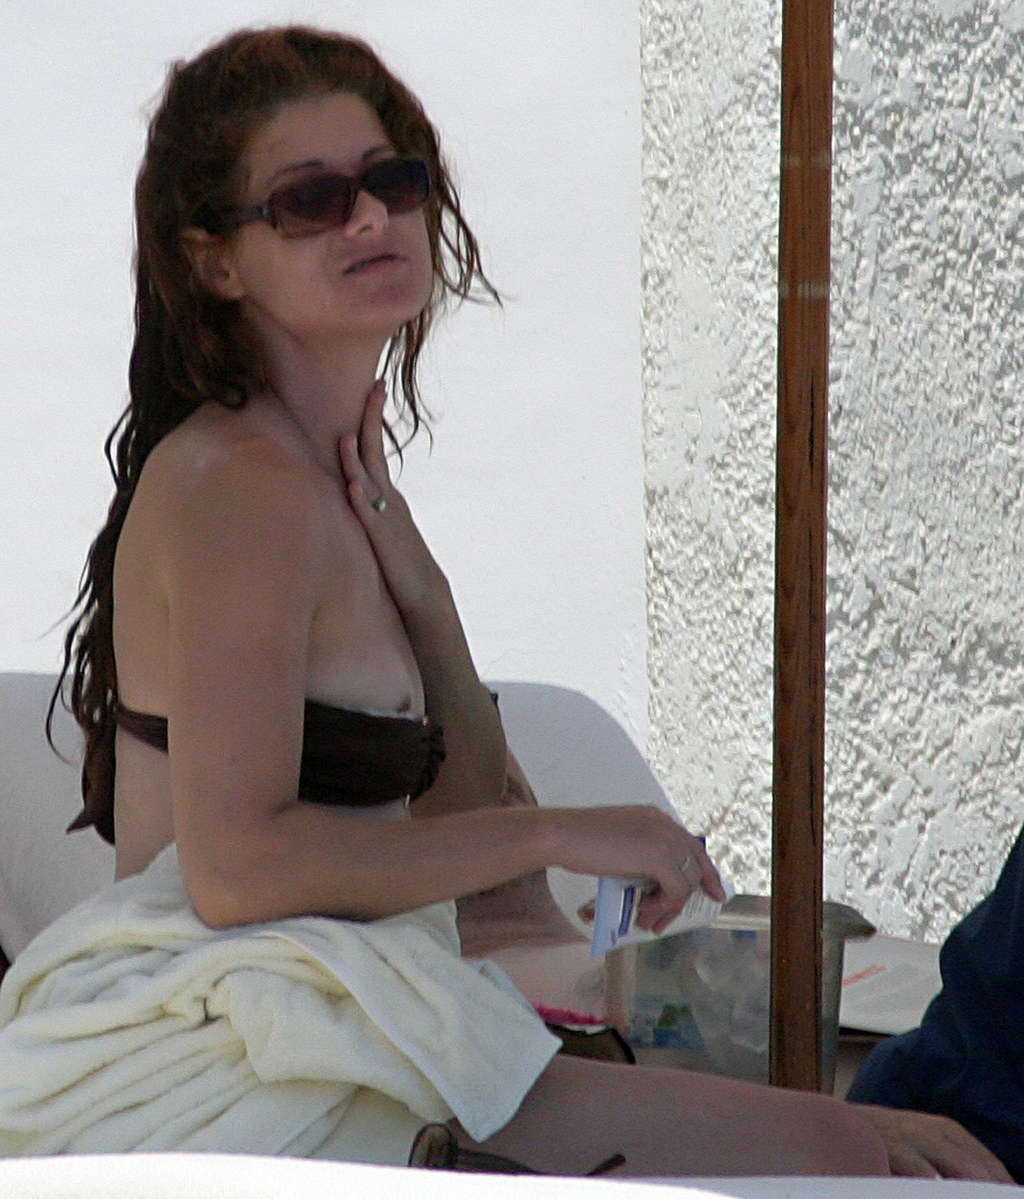 Debra Messing nipple slip on beach paparazzi pictures and posing nude #75372277